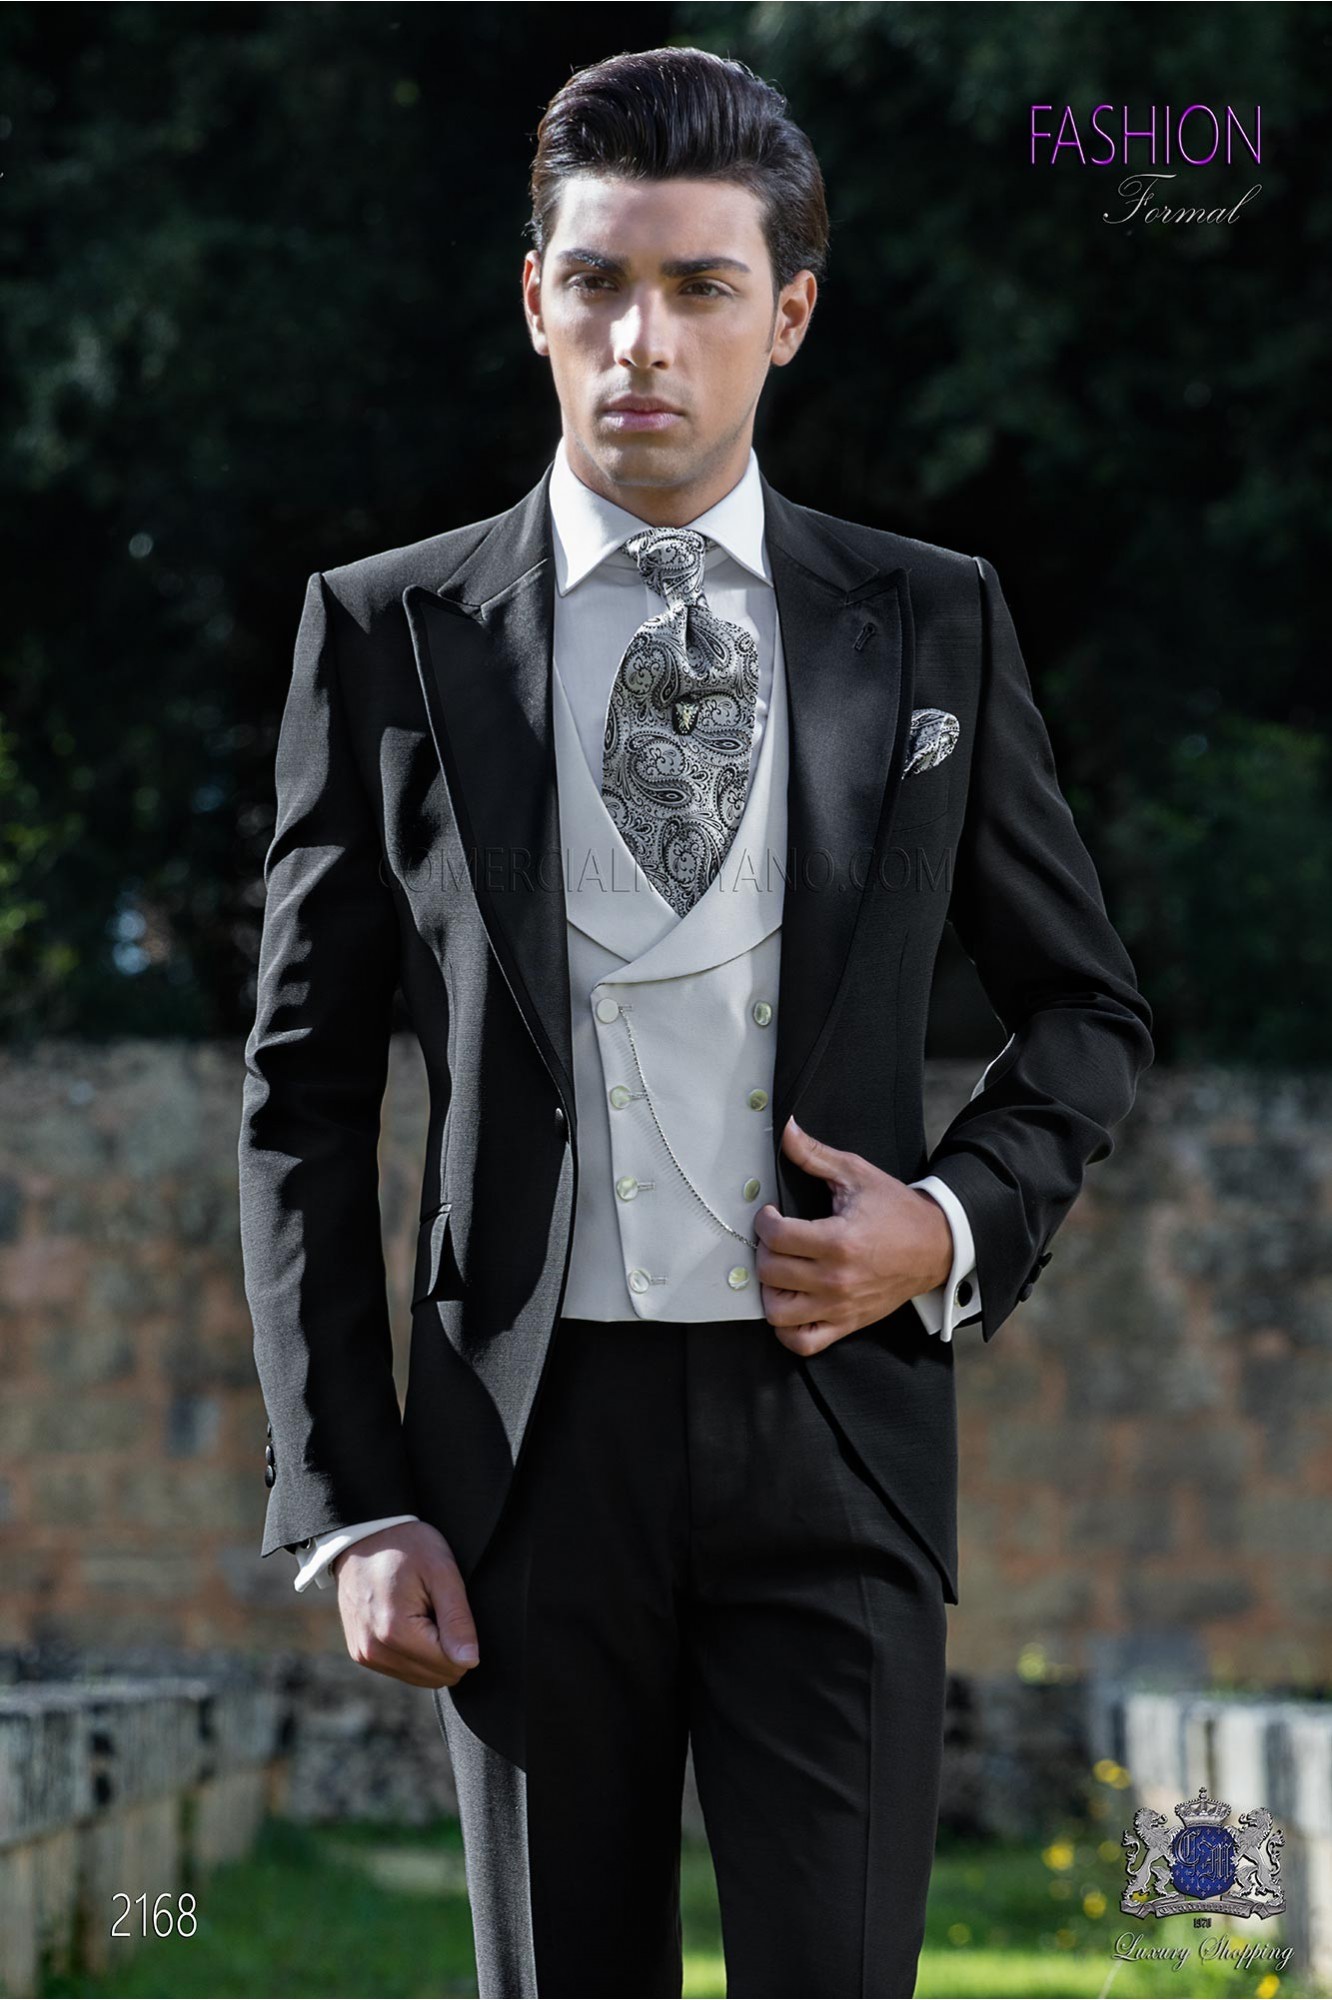 Italian wedding suit Slim stylish cut. Peak lapel with contrast fabric piping. Made from wool and acetate fabric in black. model 2168 Mario Moyano